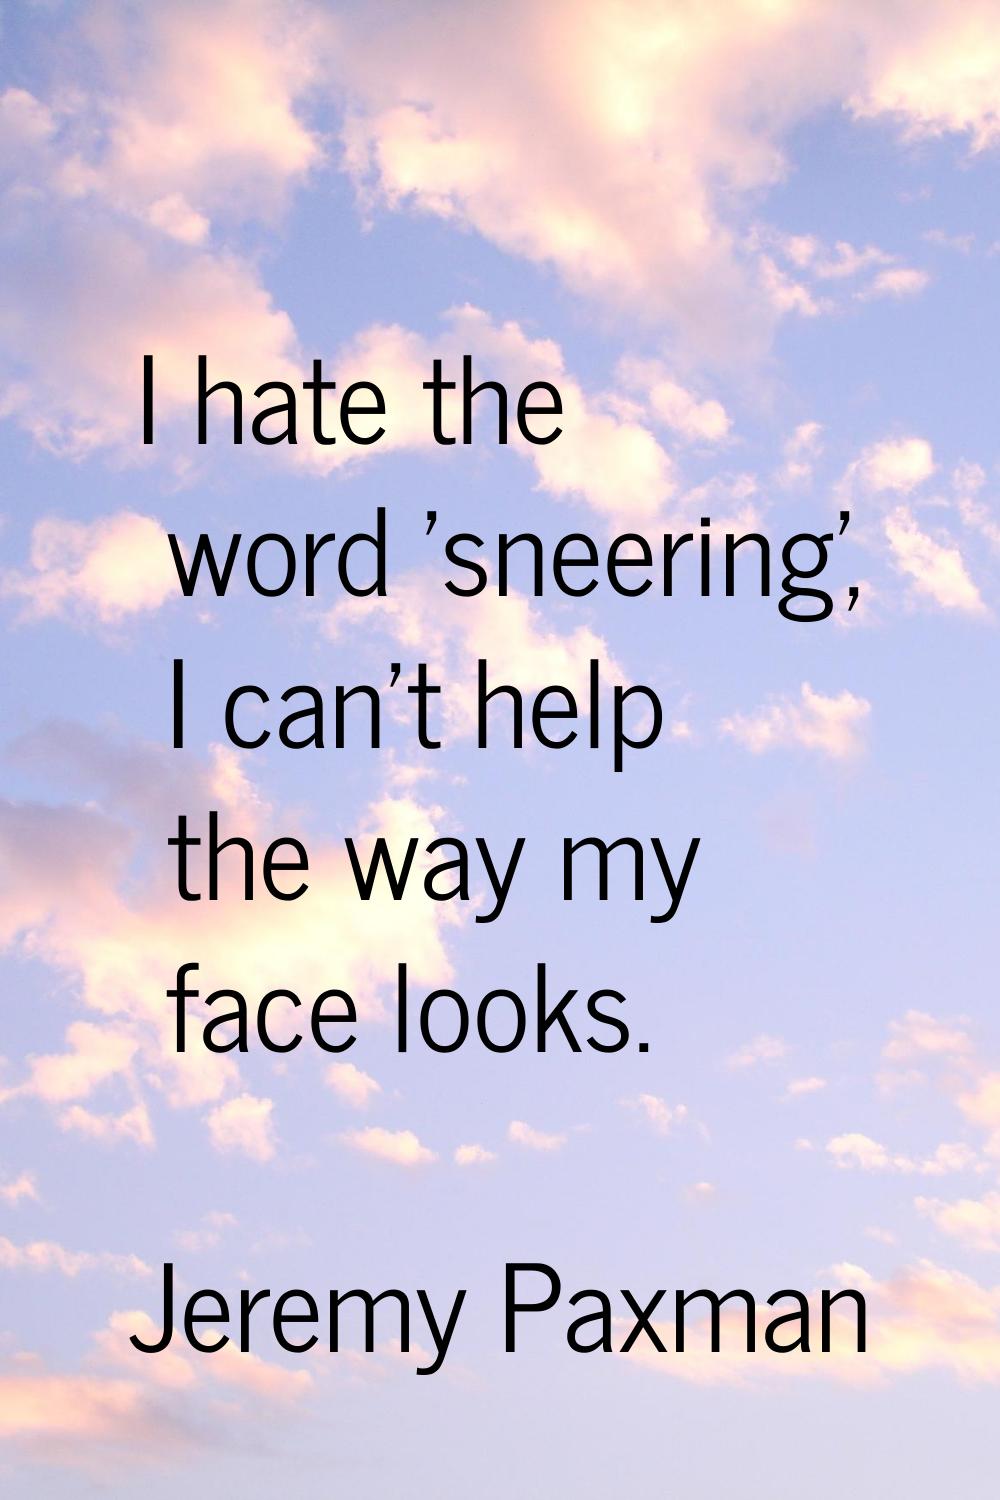 I hate the word 'sneering', I can't help the way my face looks.